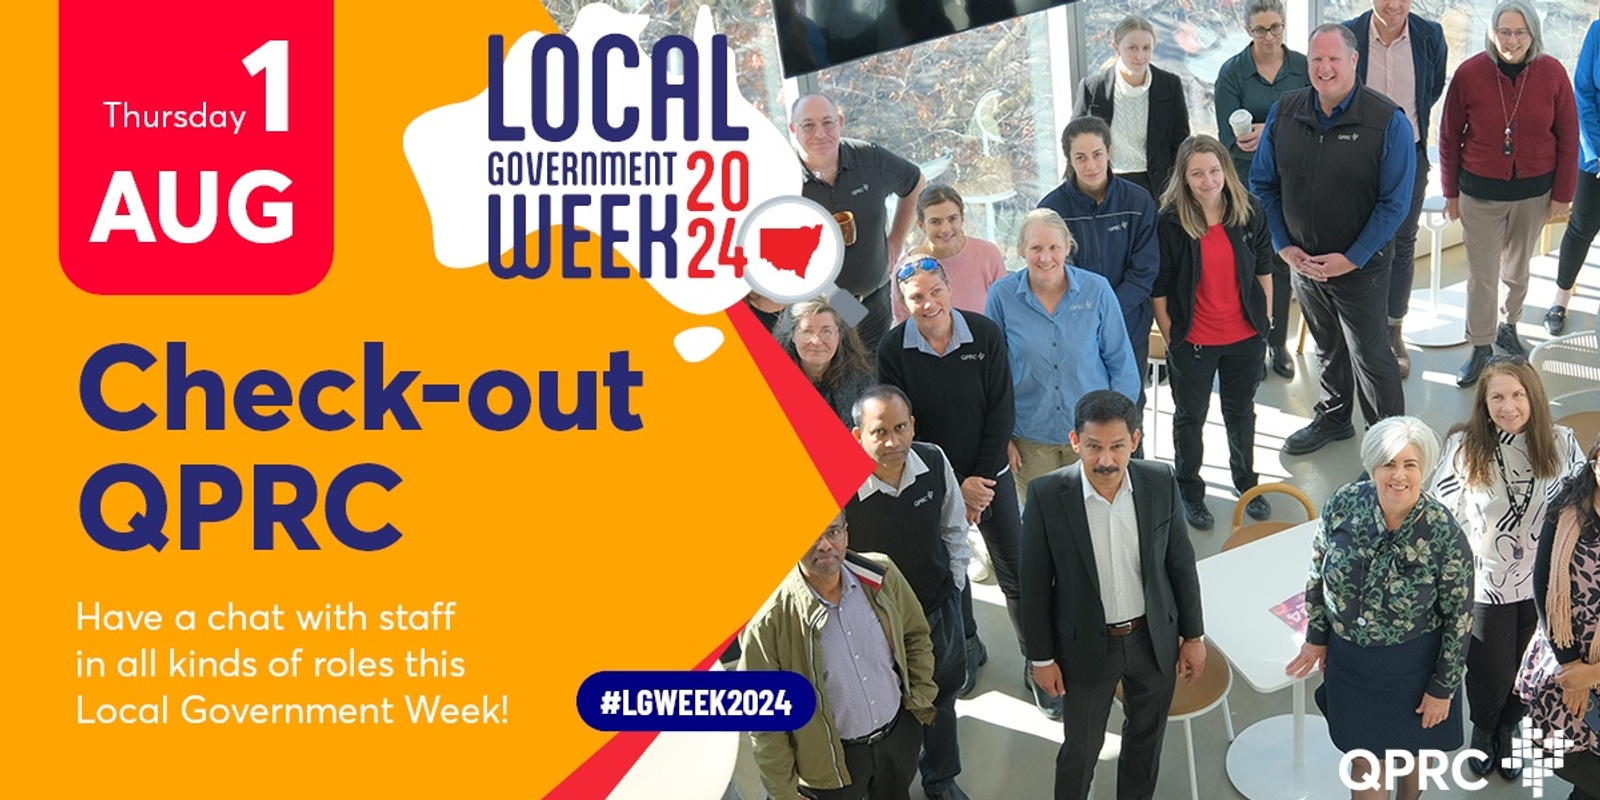 Banner image for Check-out QPRC for Local Government Week